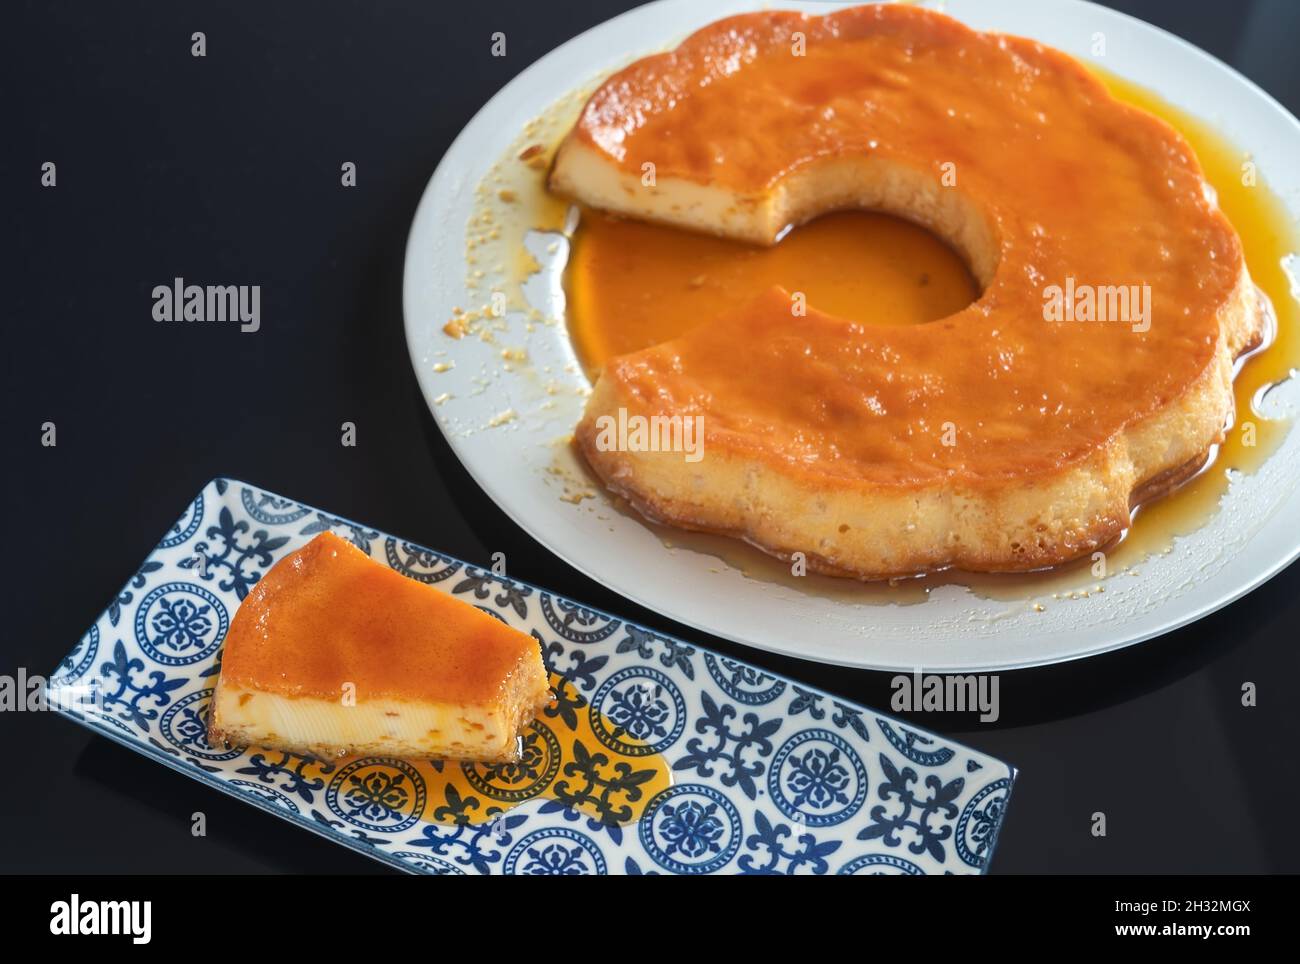 https://c8.alamy.com/comp/2H32MGX/pudding-delicious-brazilian-condensed-milk-dessert-cut-into-pieces-on-a-plate-2H32MGX.jpg